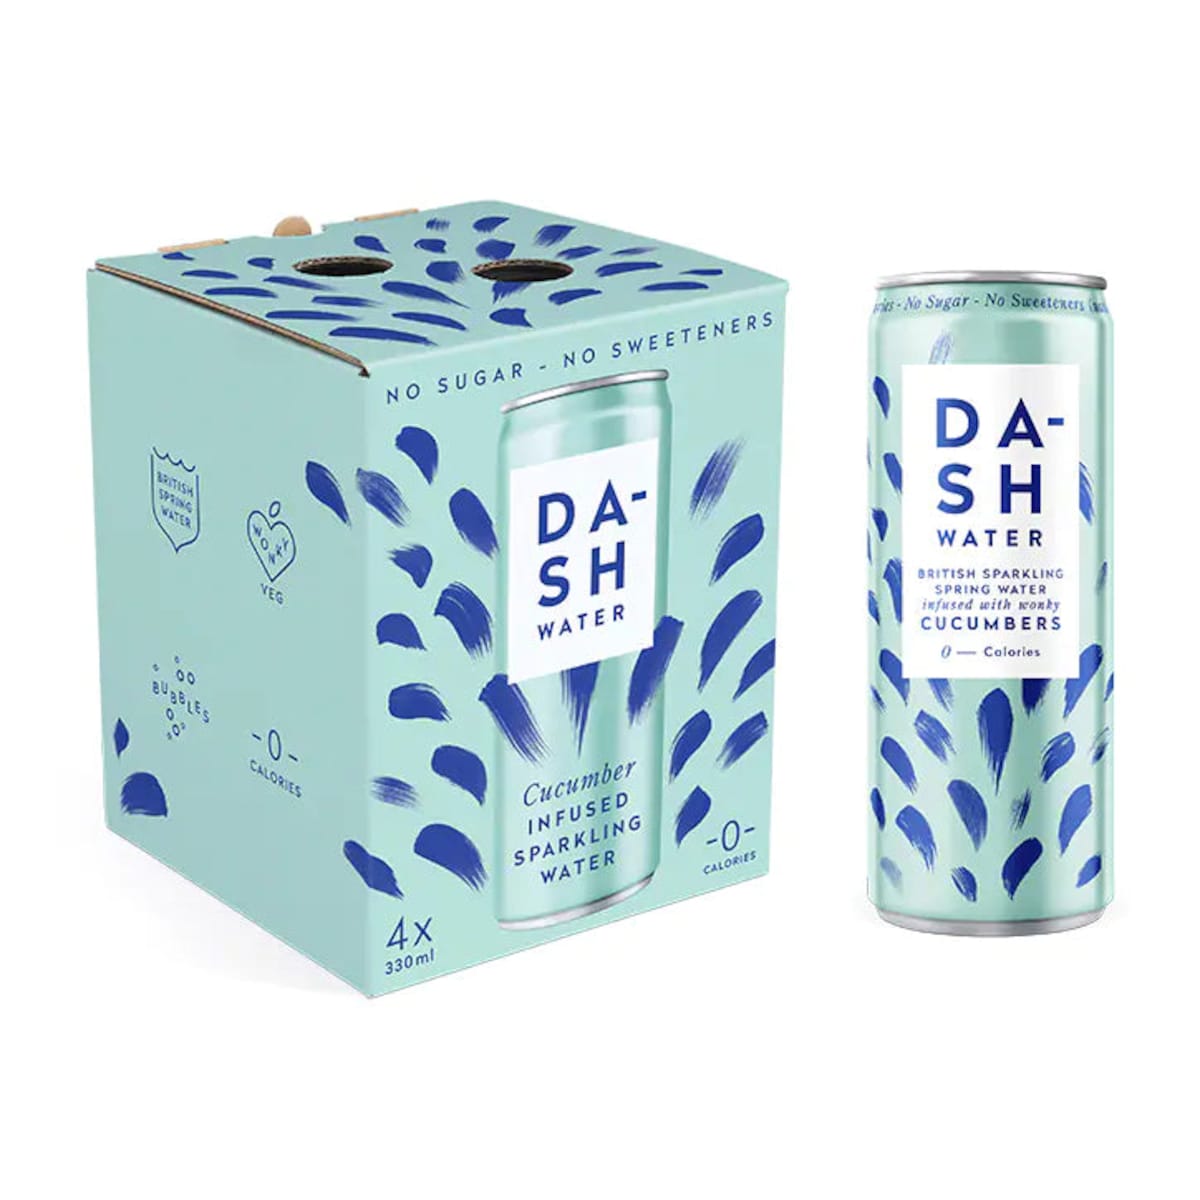 Dash Water Cucumber Infused Sparkling Water 4 x 300ml